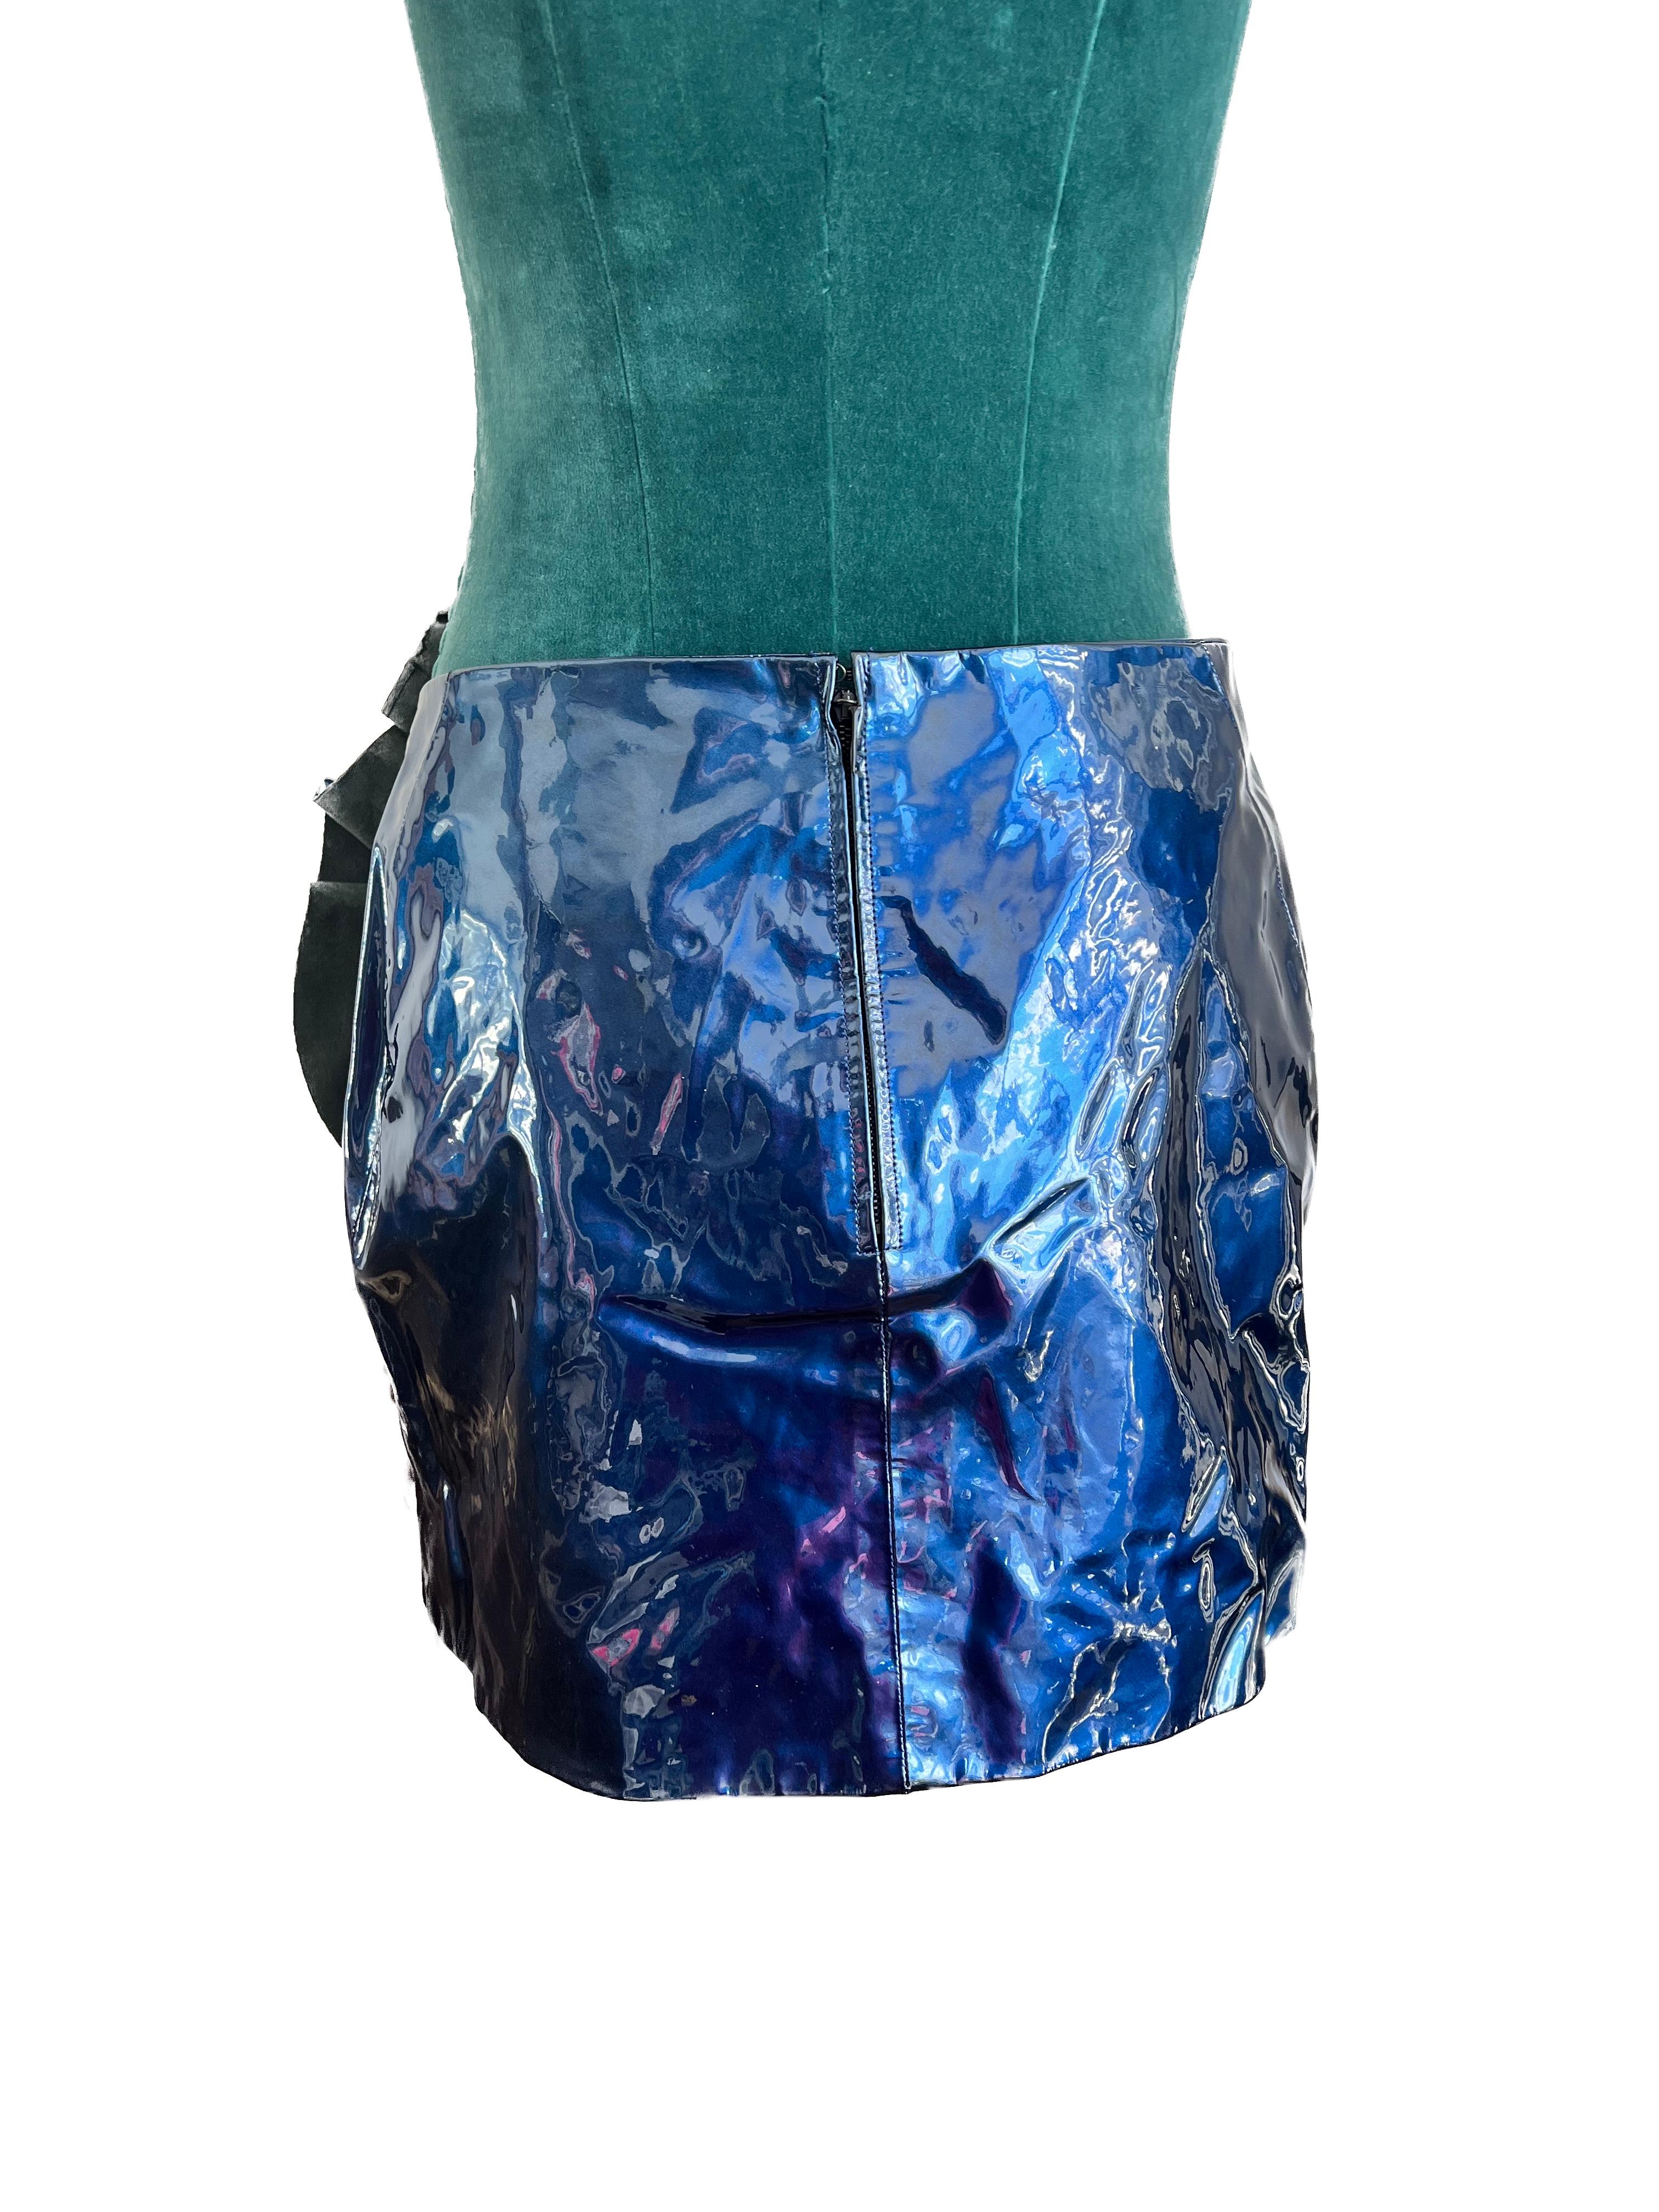 Saint Laurent 2017 Blue Paten Mini Leather Skirt with Ruffle  In New Condition For Sale In Toronto, CA